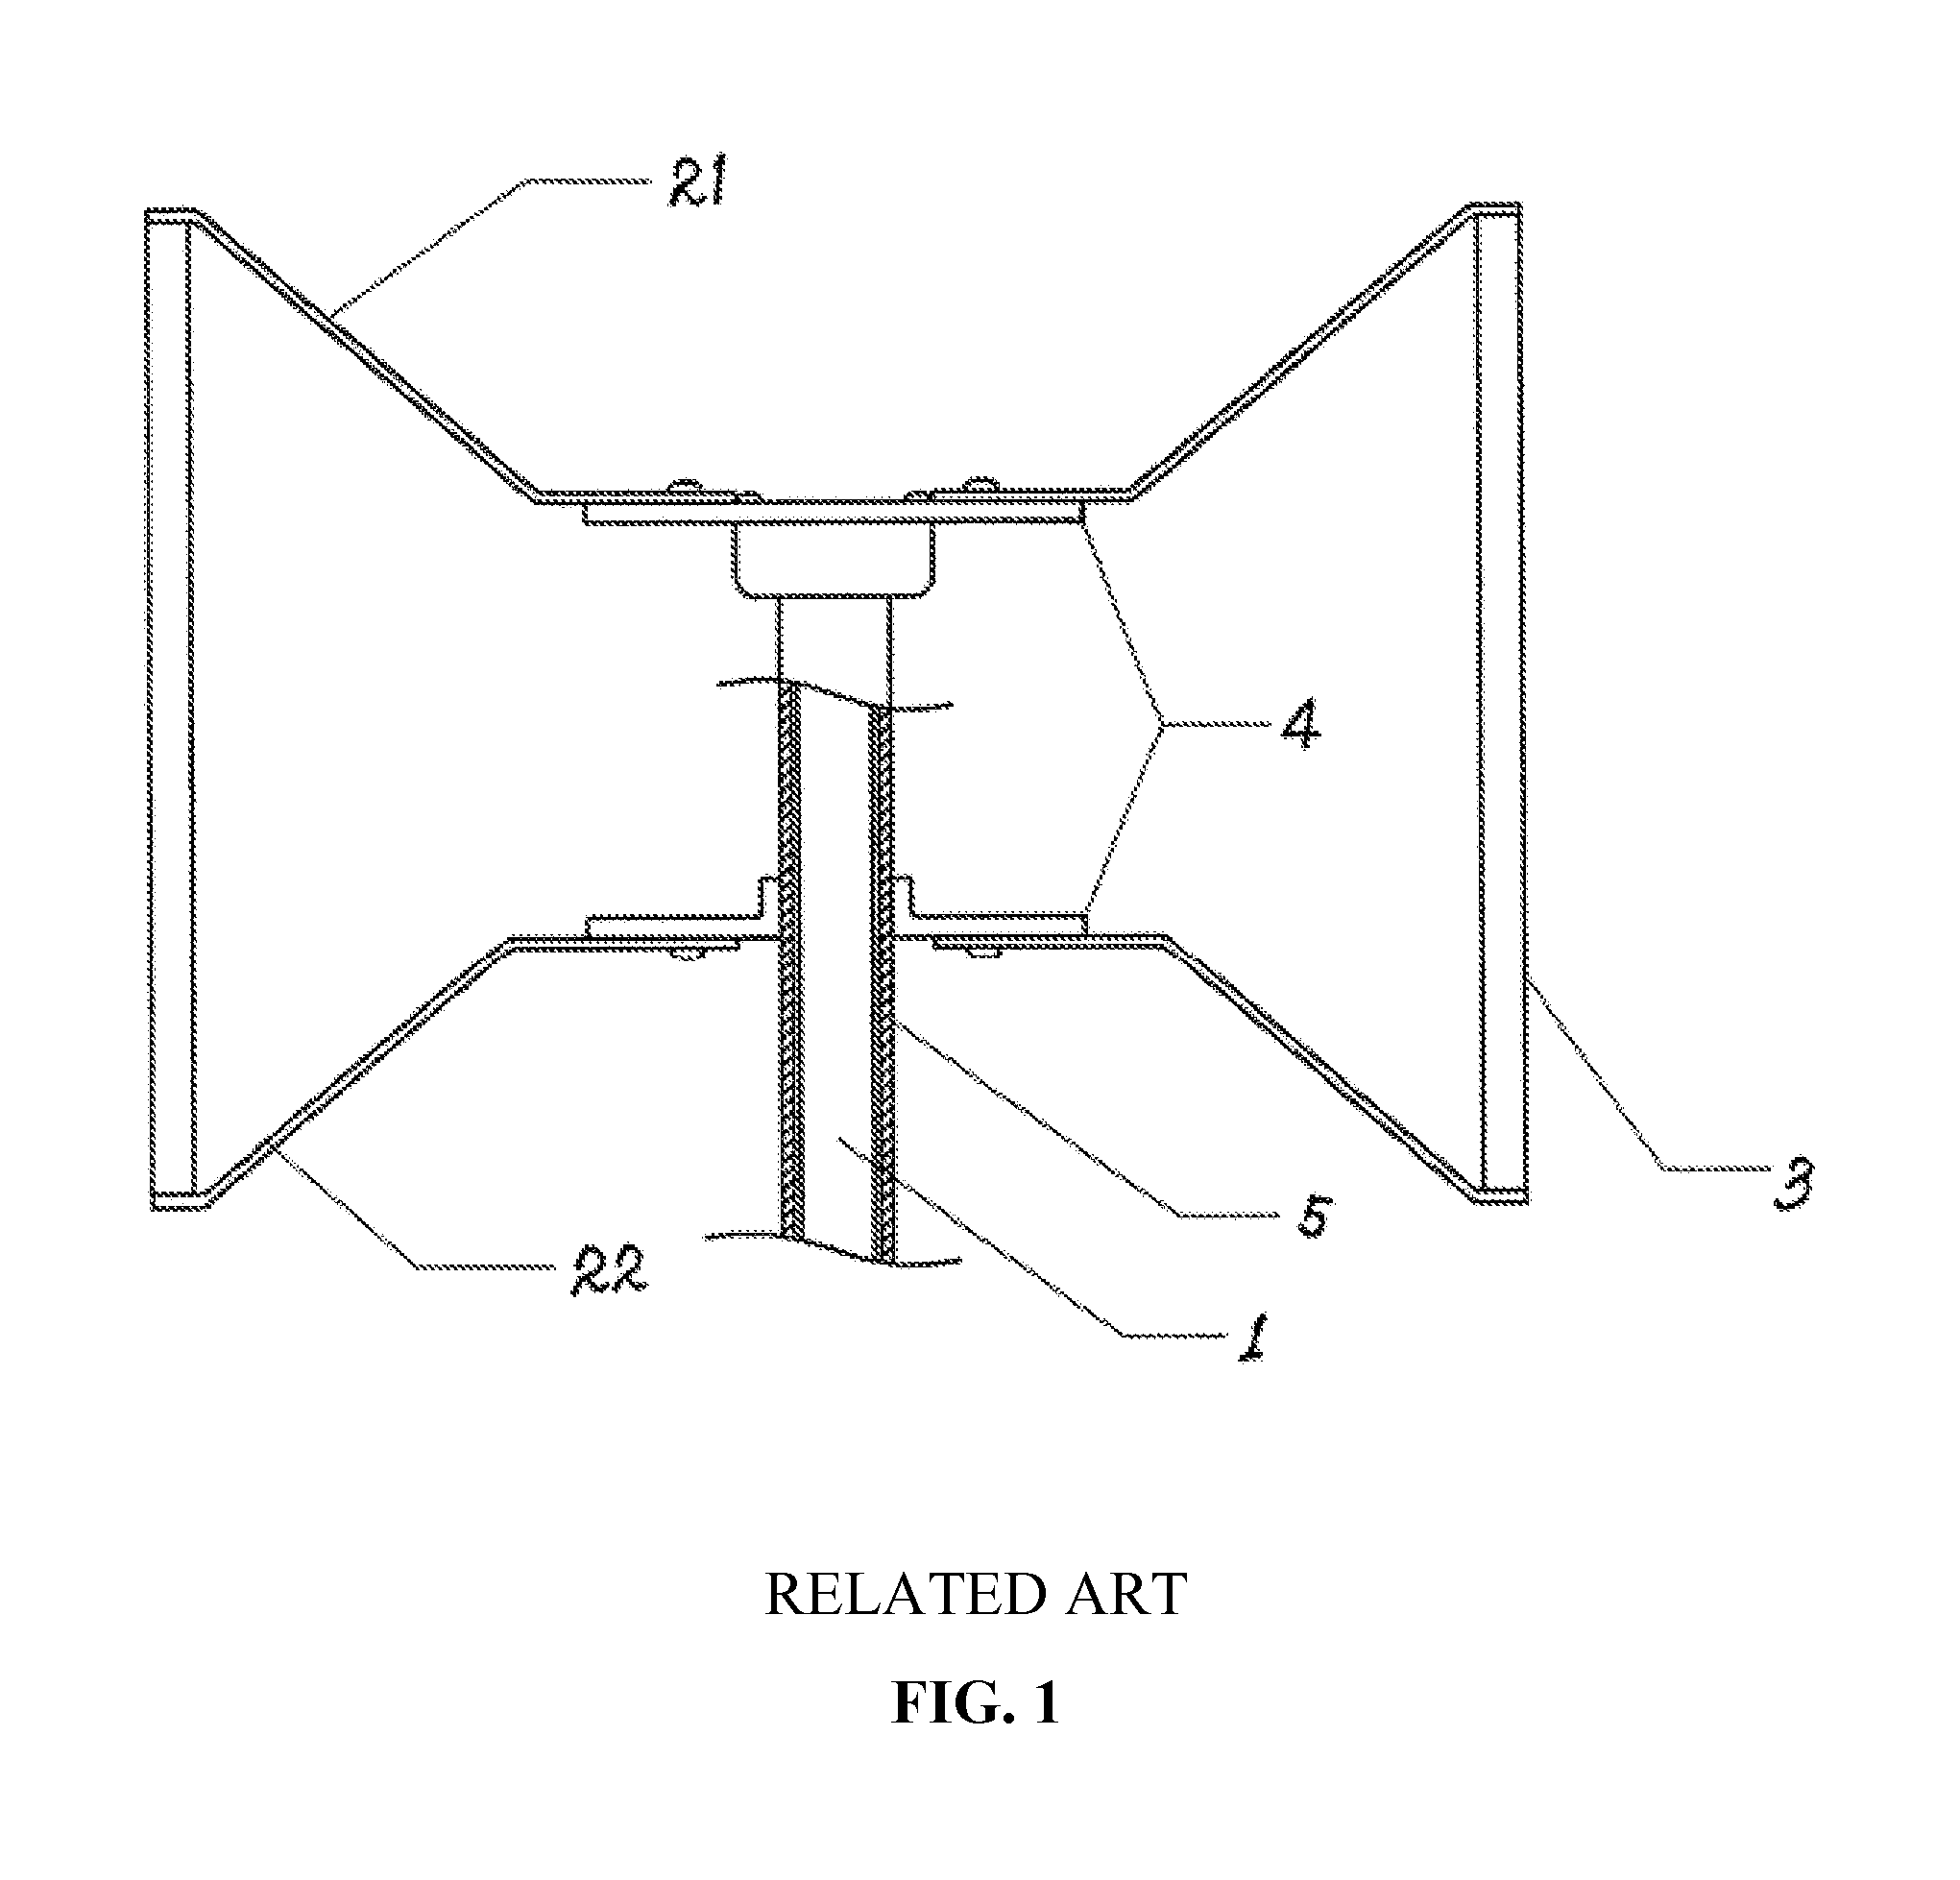 Vertical axis wind turbine and method of installing blades therein